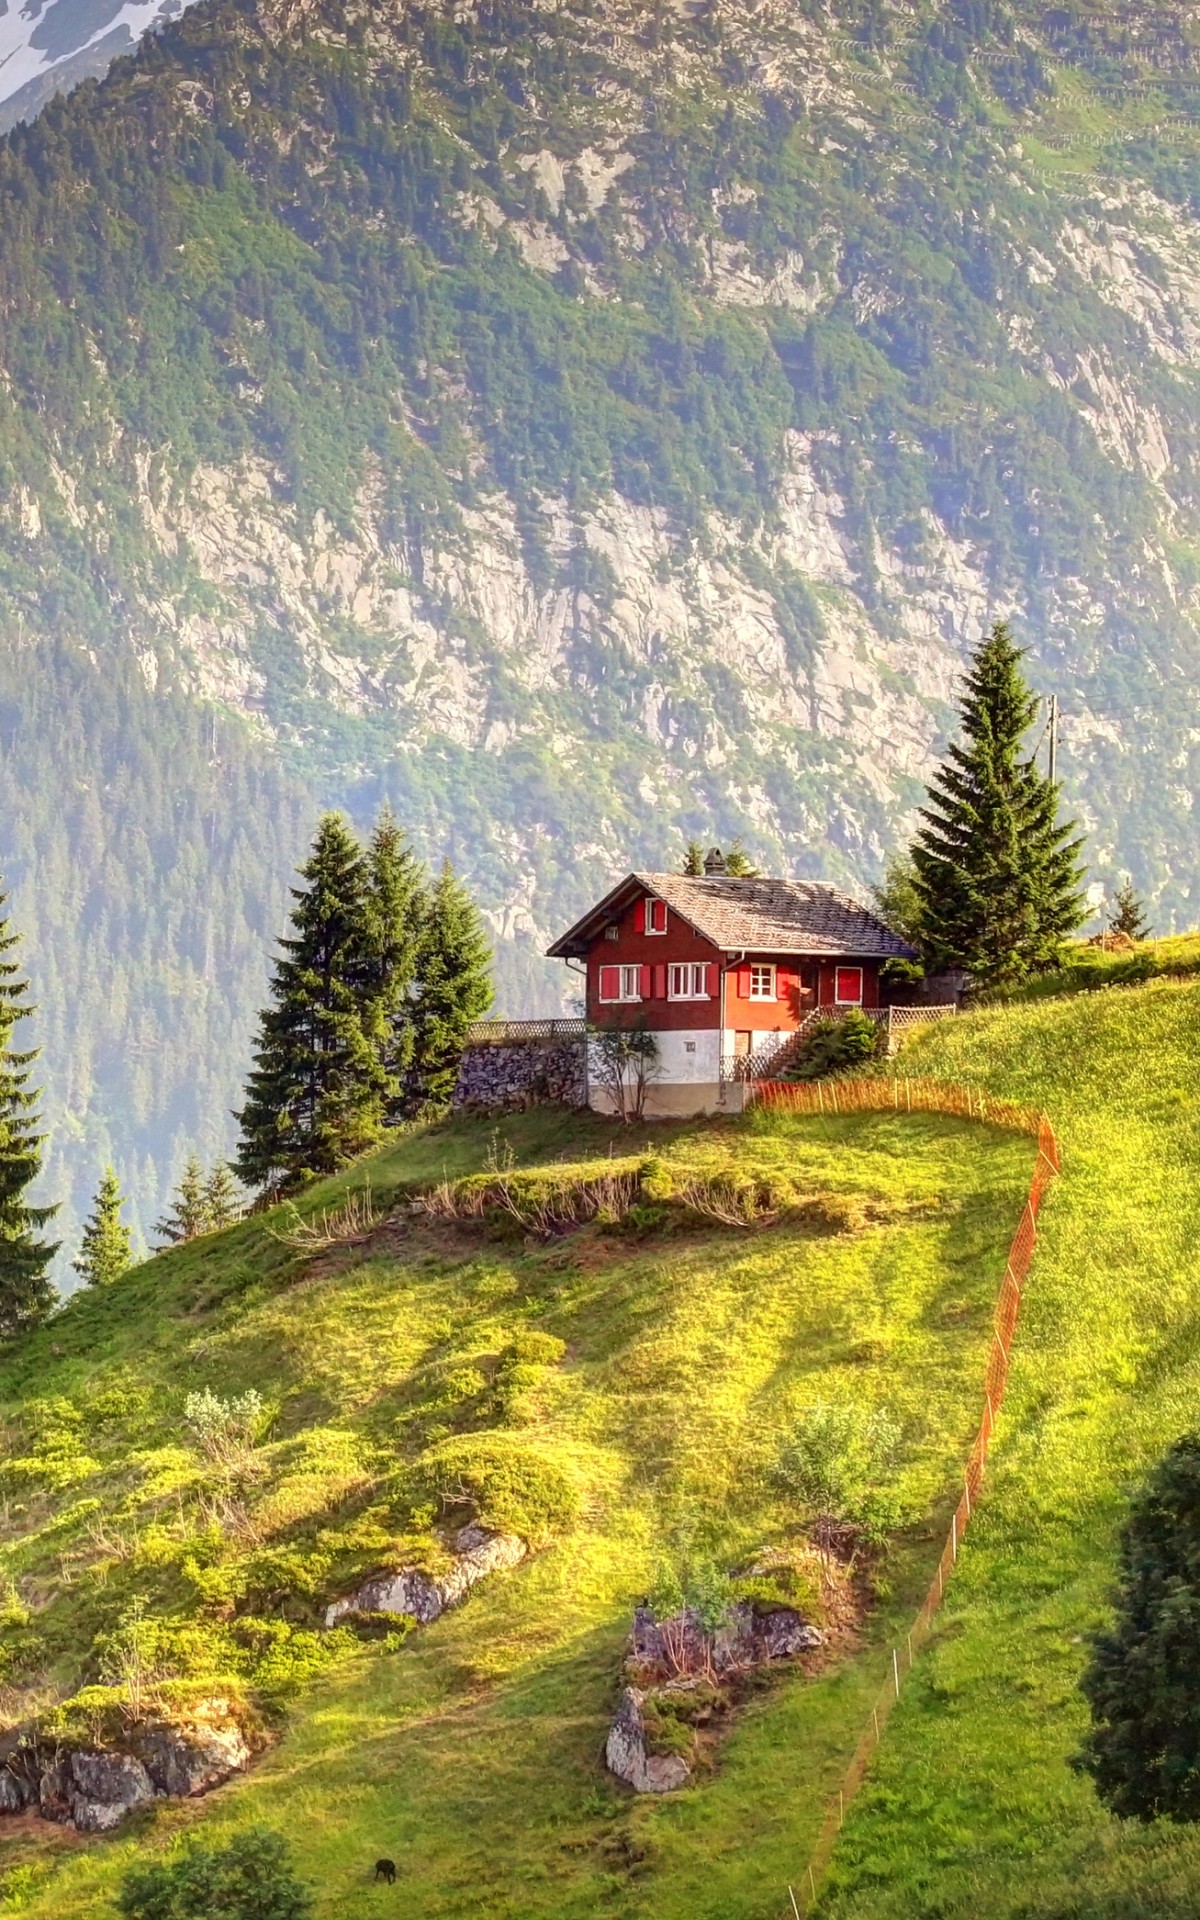 Download Wallpaper - Lonely House On Mountain , HD Wallpaper & Backgrounds